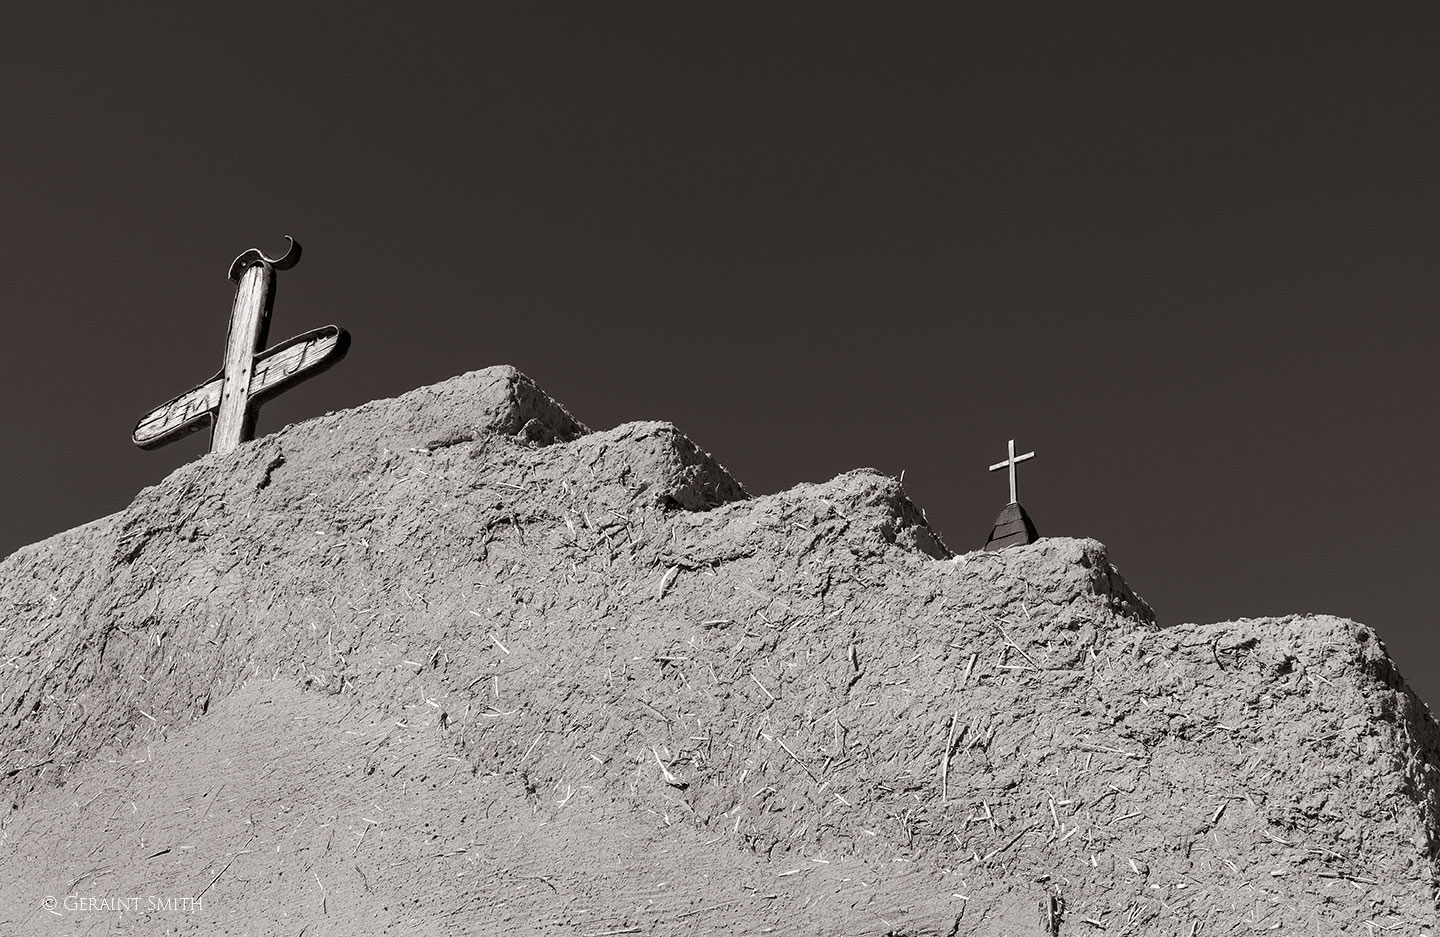 Las Trampas church, on the high road to Taos